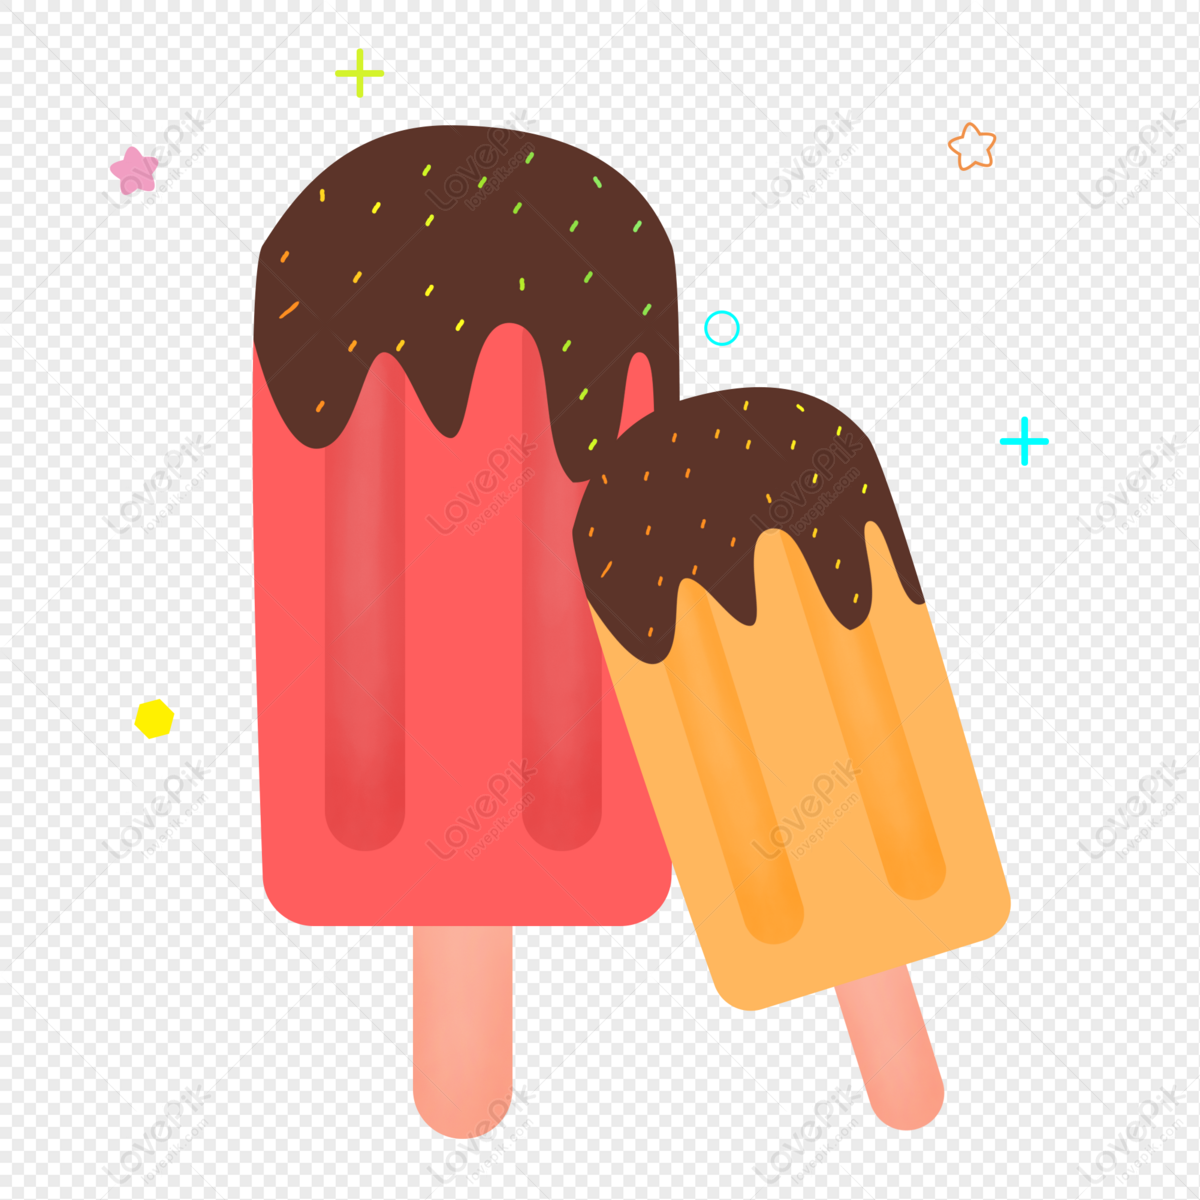 Ice Cream Hand Vector Art PNG, Ice Cream Showing Dislike Hand Sign, Fun, Bad,  Cartoon PNG Image For Free Download